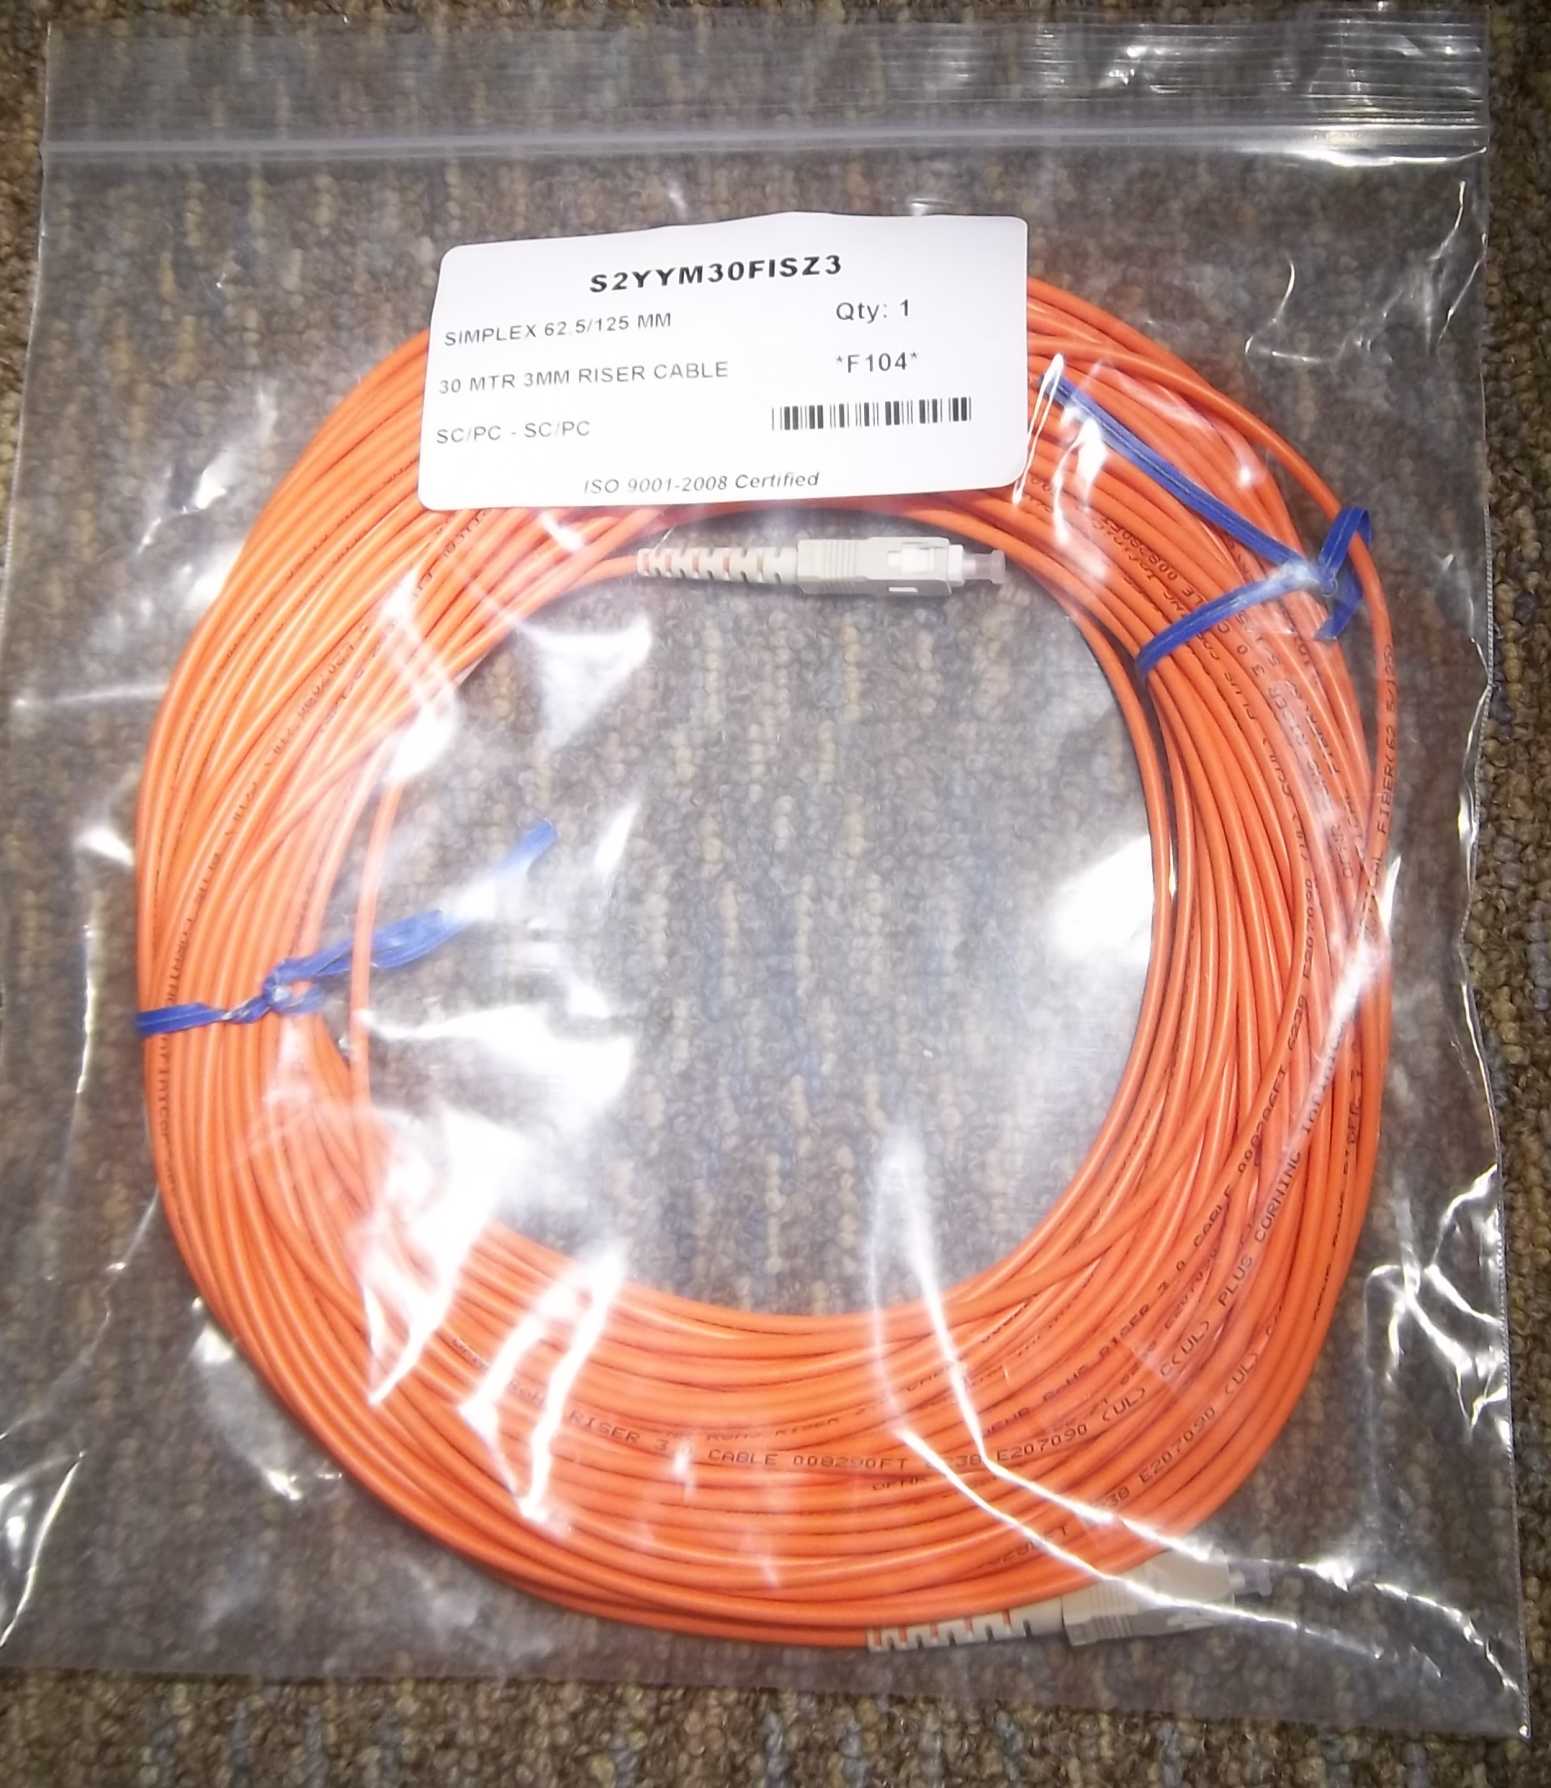 30 Meter 3 mm Riser Cable-Simplex 62.5 by 125mm S2YYM30FISZ3 30 meter 3mm Riser Cable fiber optic cable fiber optic riser cable Simplex 62.5mm by 125mm